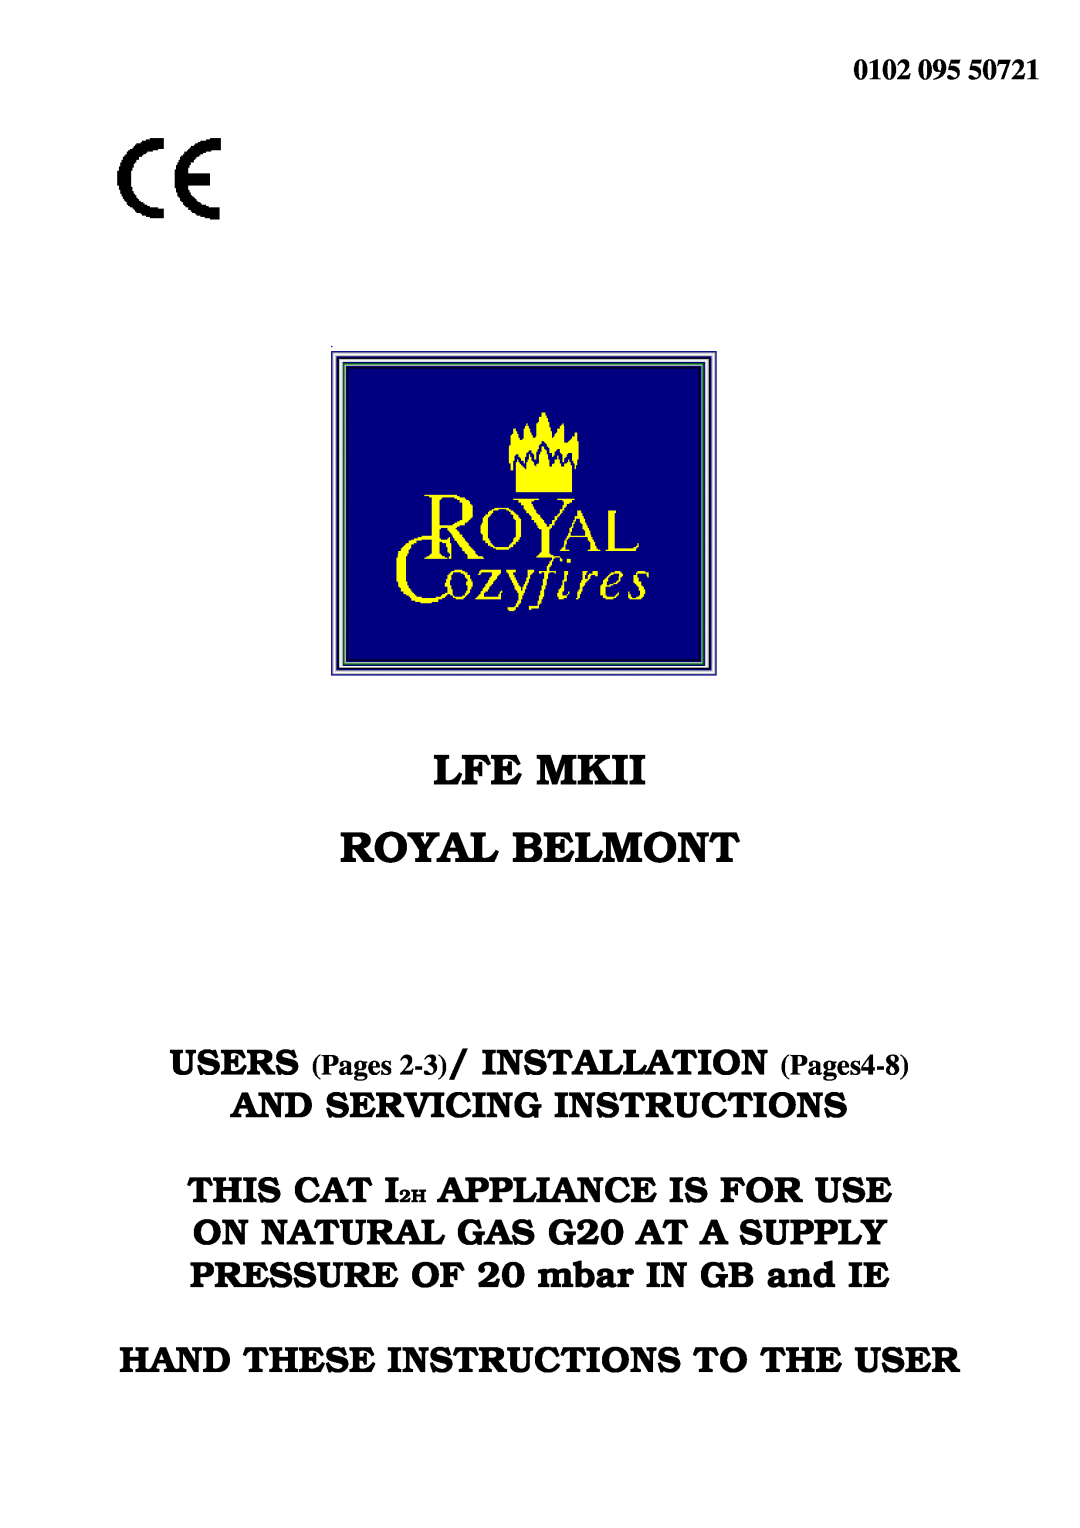 AEG G20 manual Lfe Mkii Royal Belmont, USERS Pages 2-3/INSTALLATION Pages4-8, And Servicing Instructions, 0102 